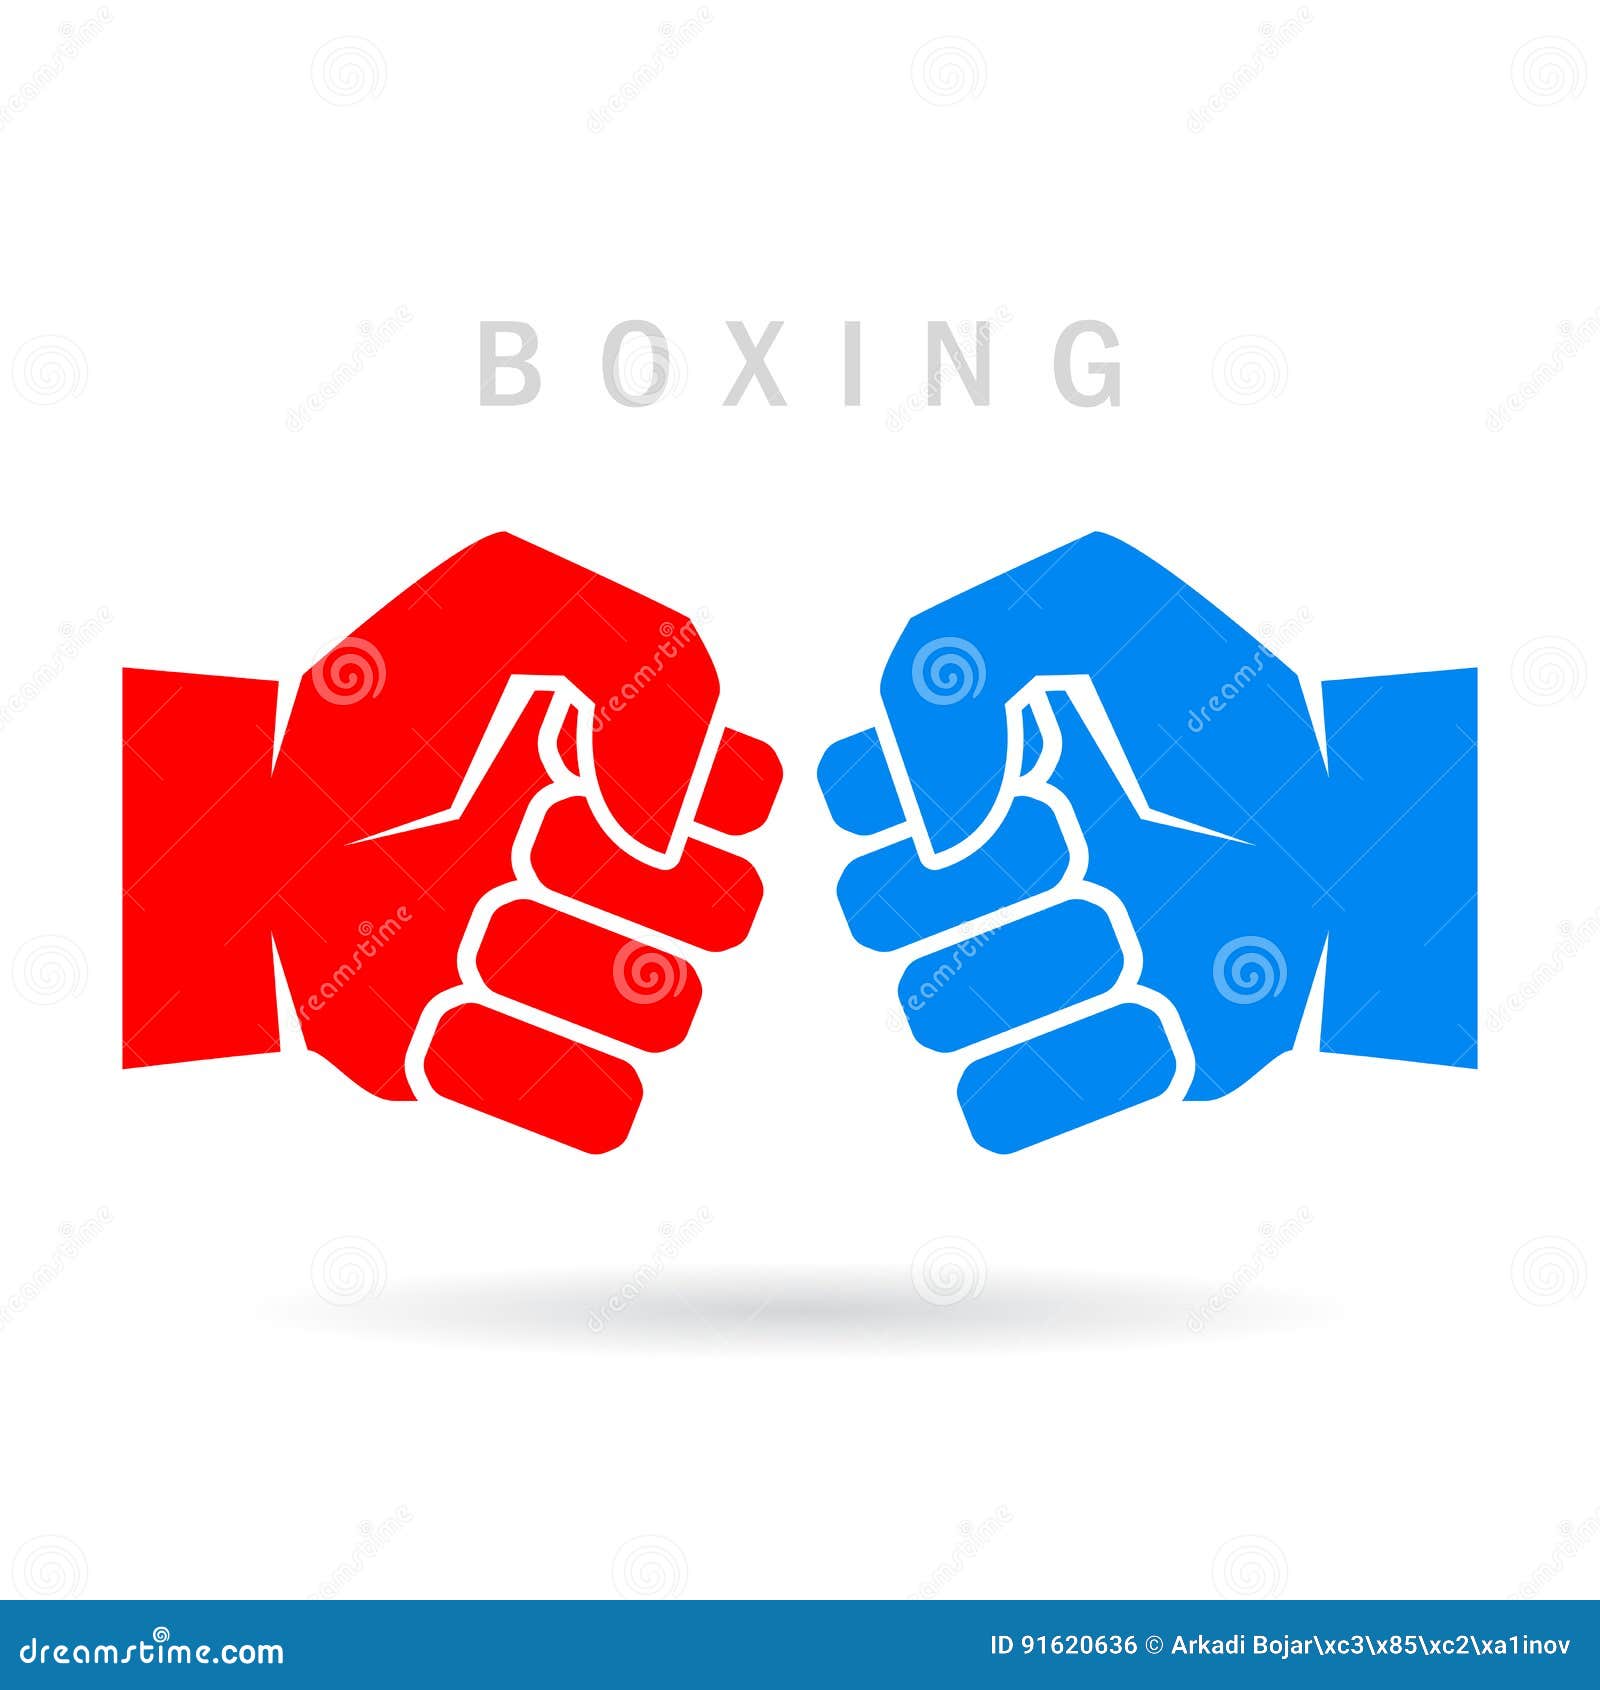 Boxing fist vector icon stock vector. Illustration of boxing - 91620636